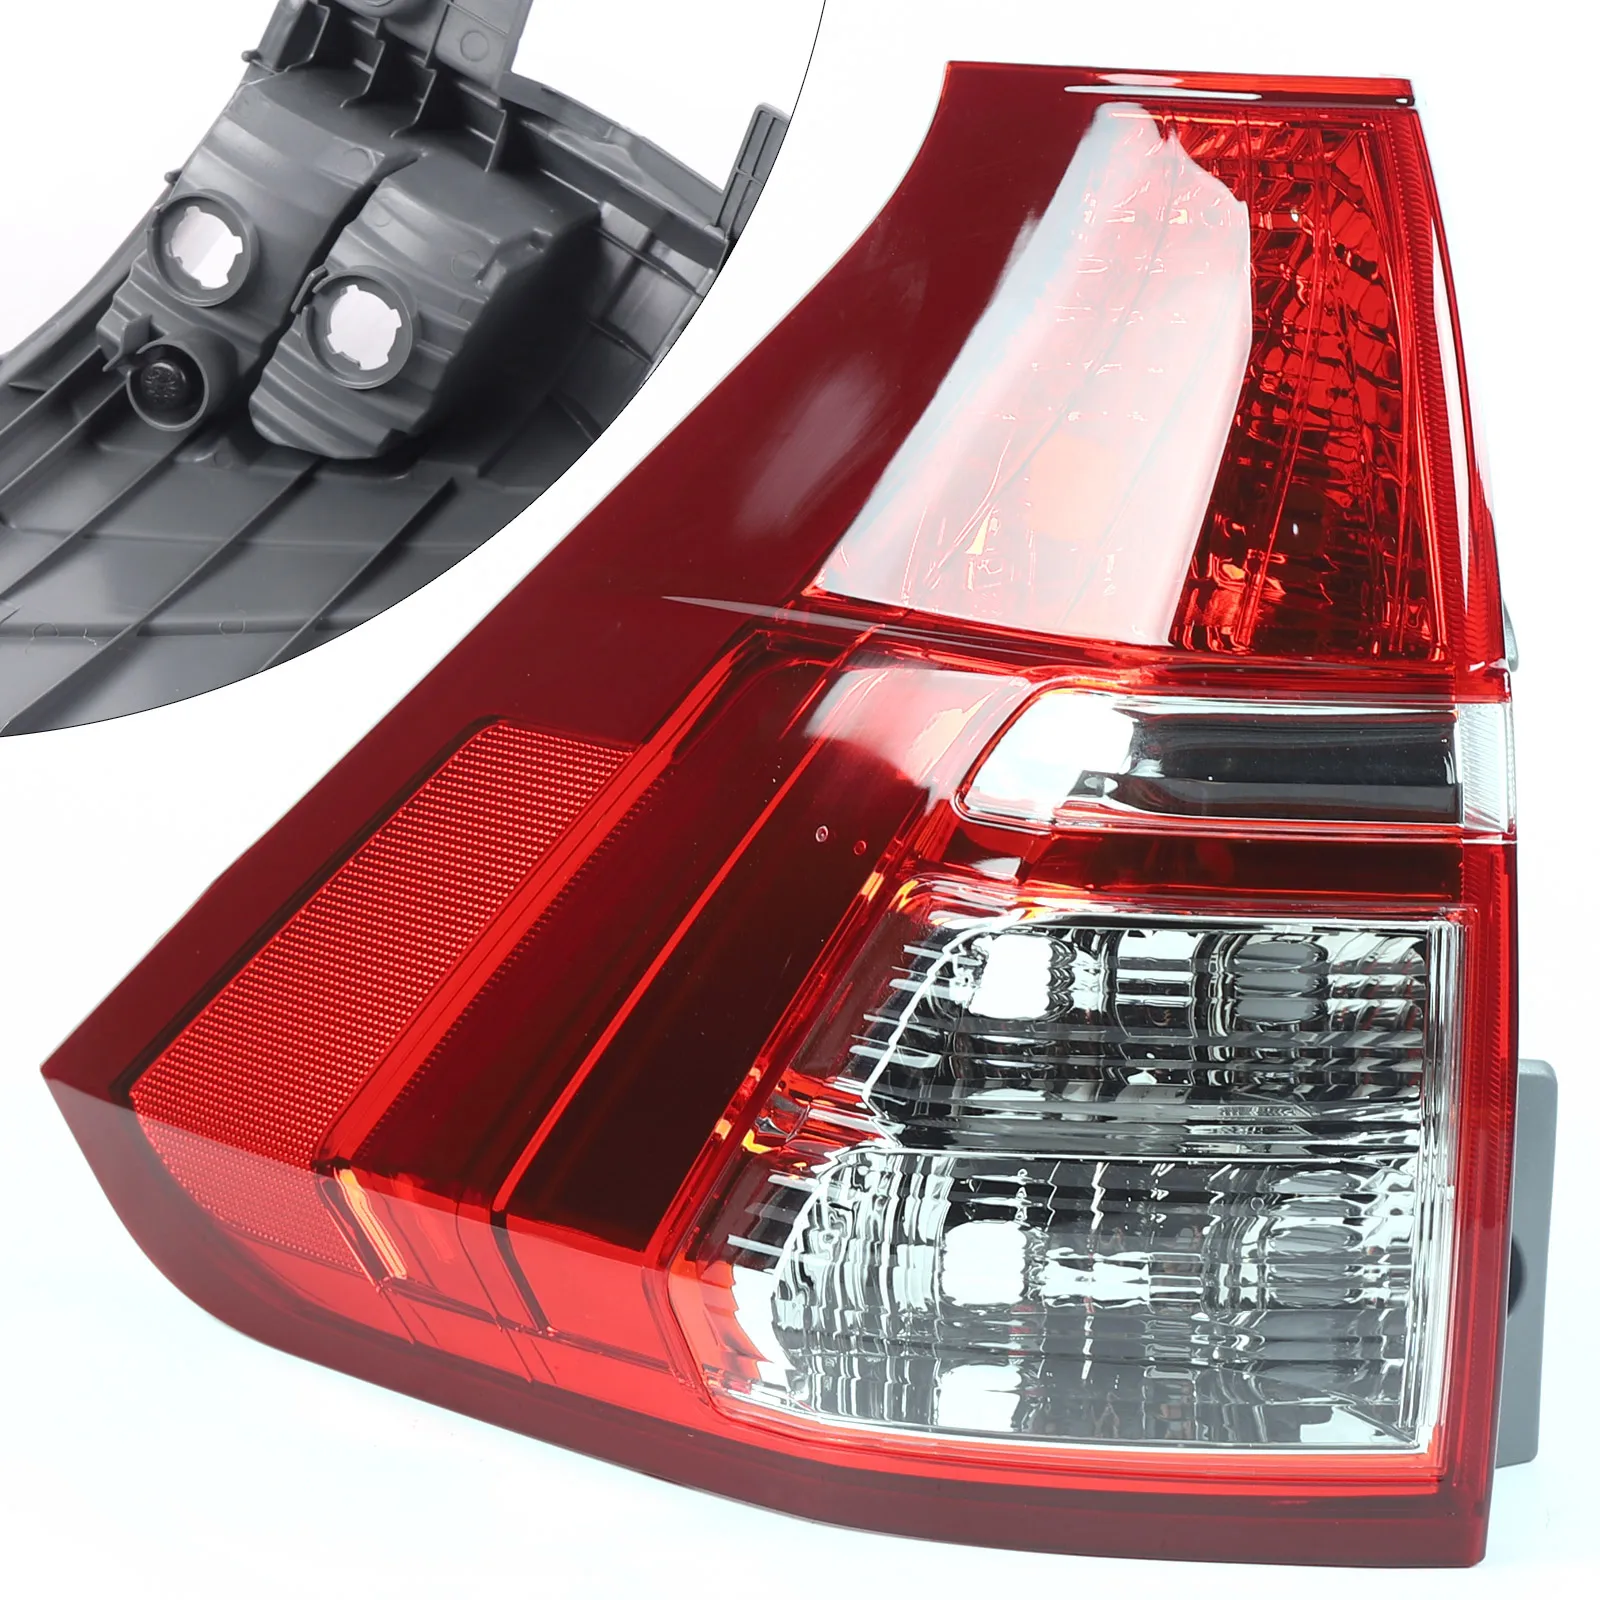 Tail Light for HONDA CRV CR-V 2015 2016 2.4L Left Driver Side Brake Stop Rear Lamp 33550T1WA01 HO2800186 motorcycle tail light rear lamp for yamaha mt09 2015 2016 led brake stop turn signals integrated taillight for motorcycle